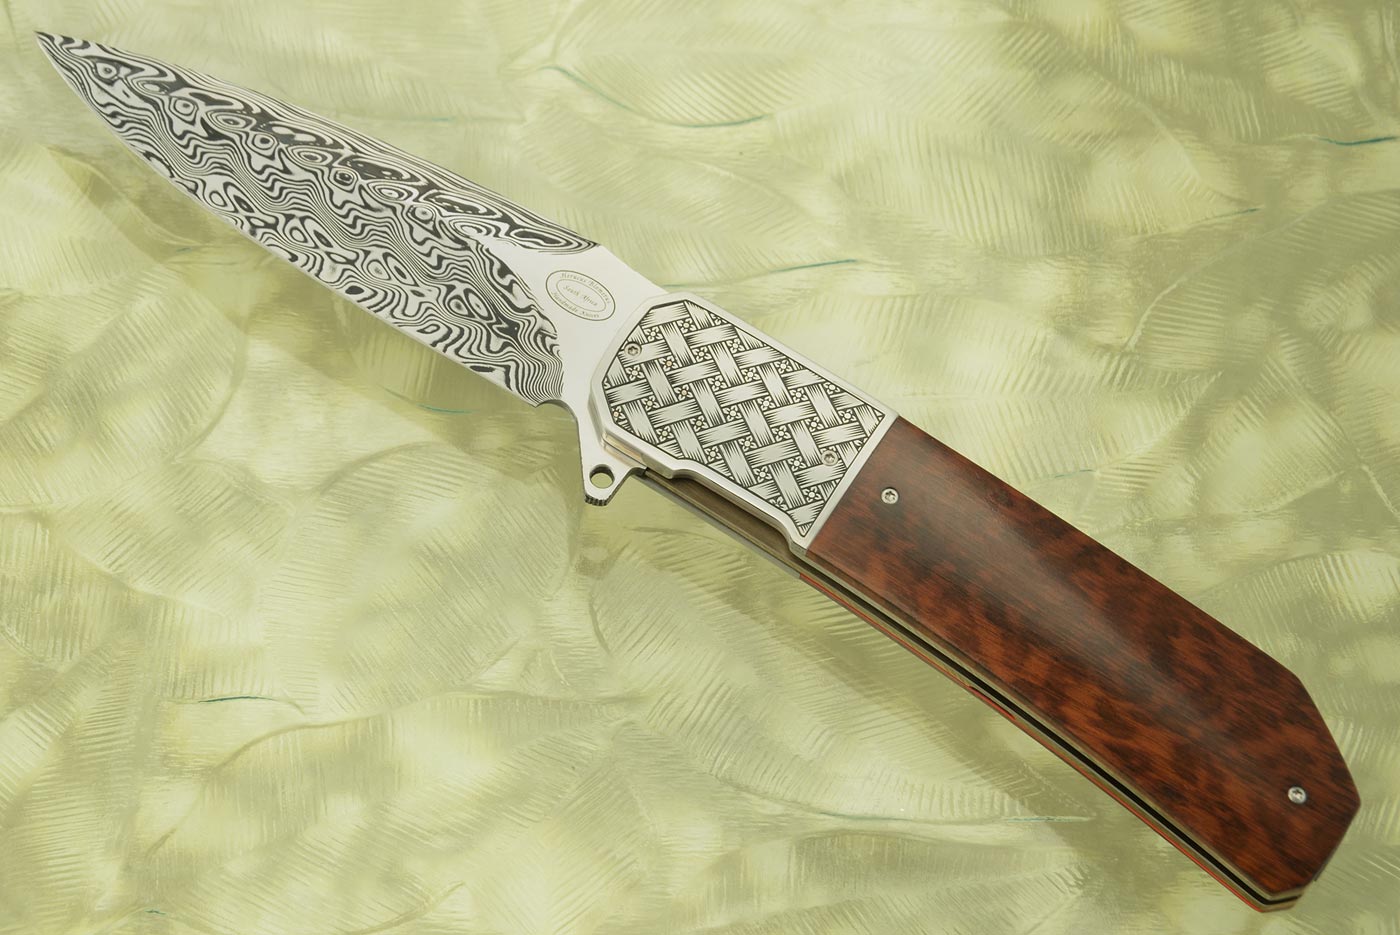 LL14 Flipper with Snakewood, Damascus, and Engraved Zirconium (IKBS)